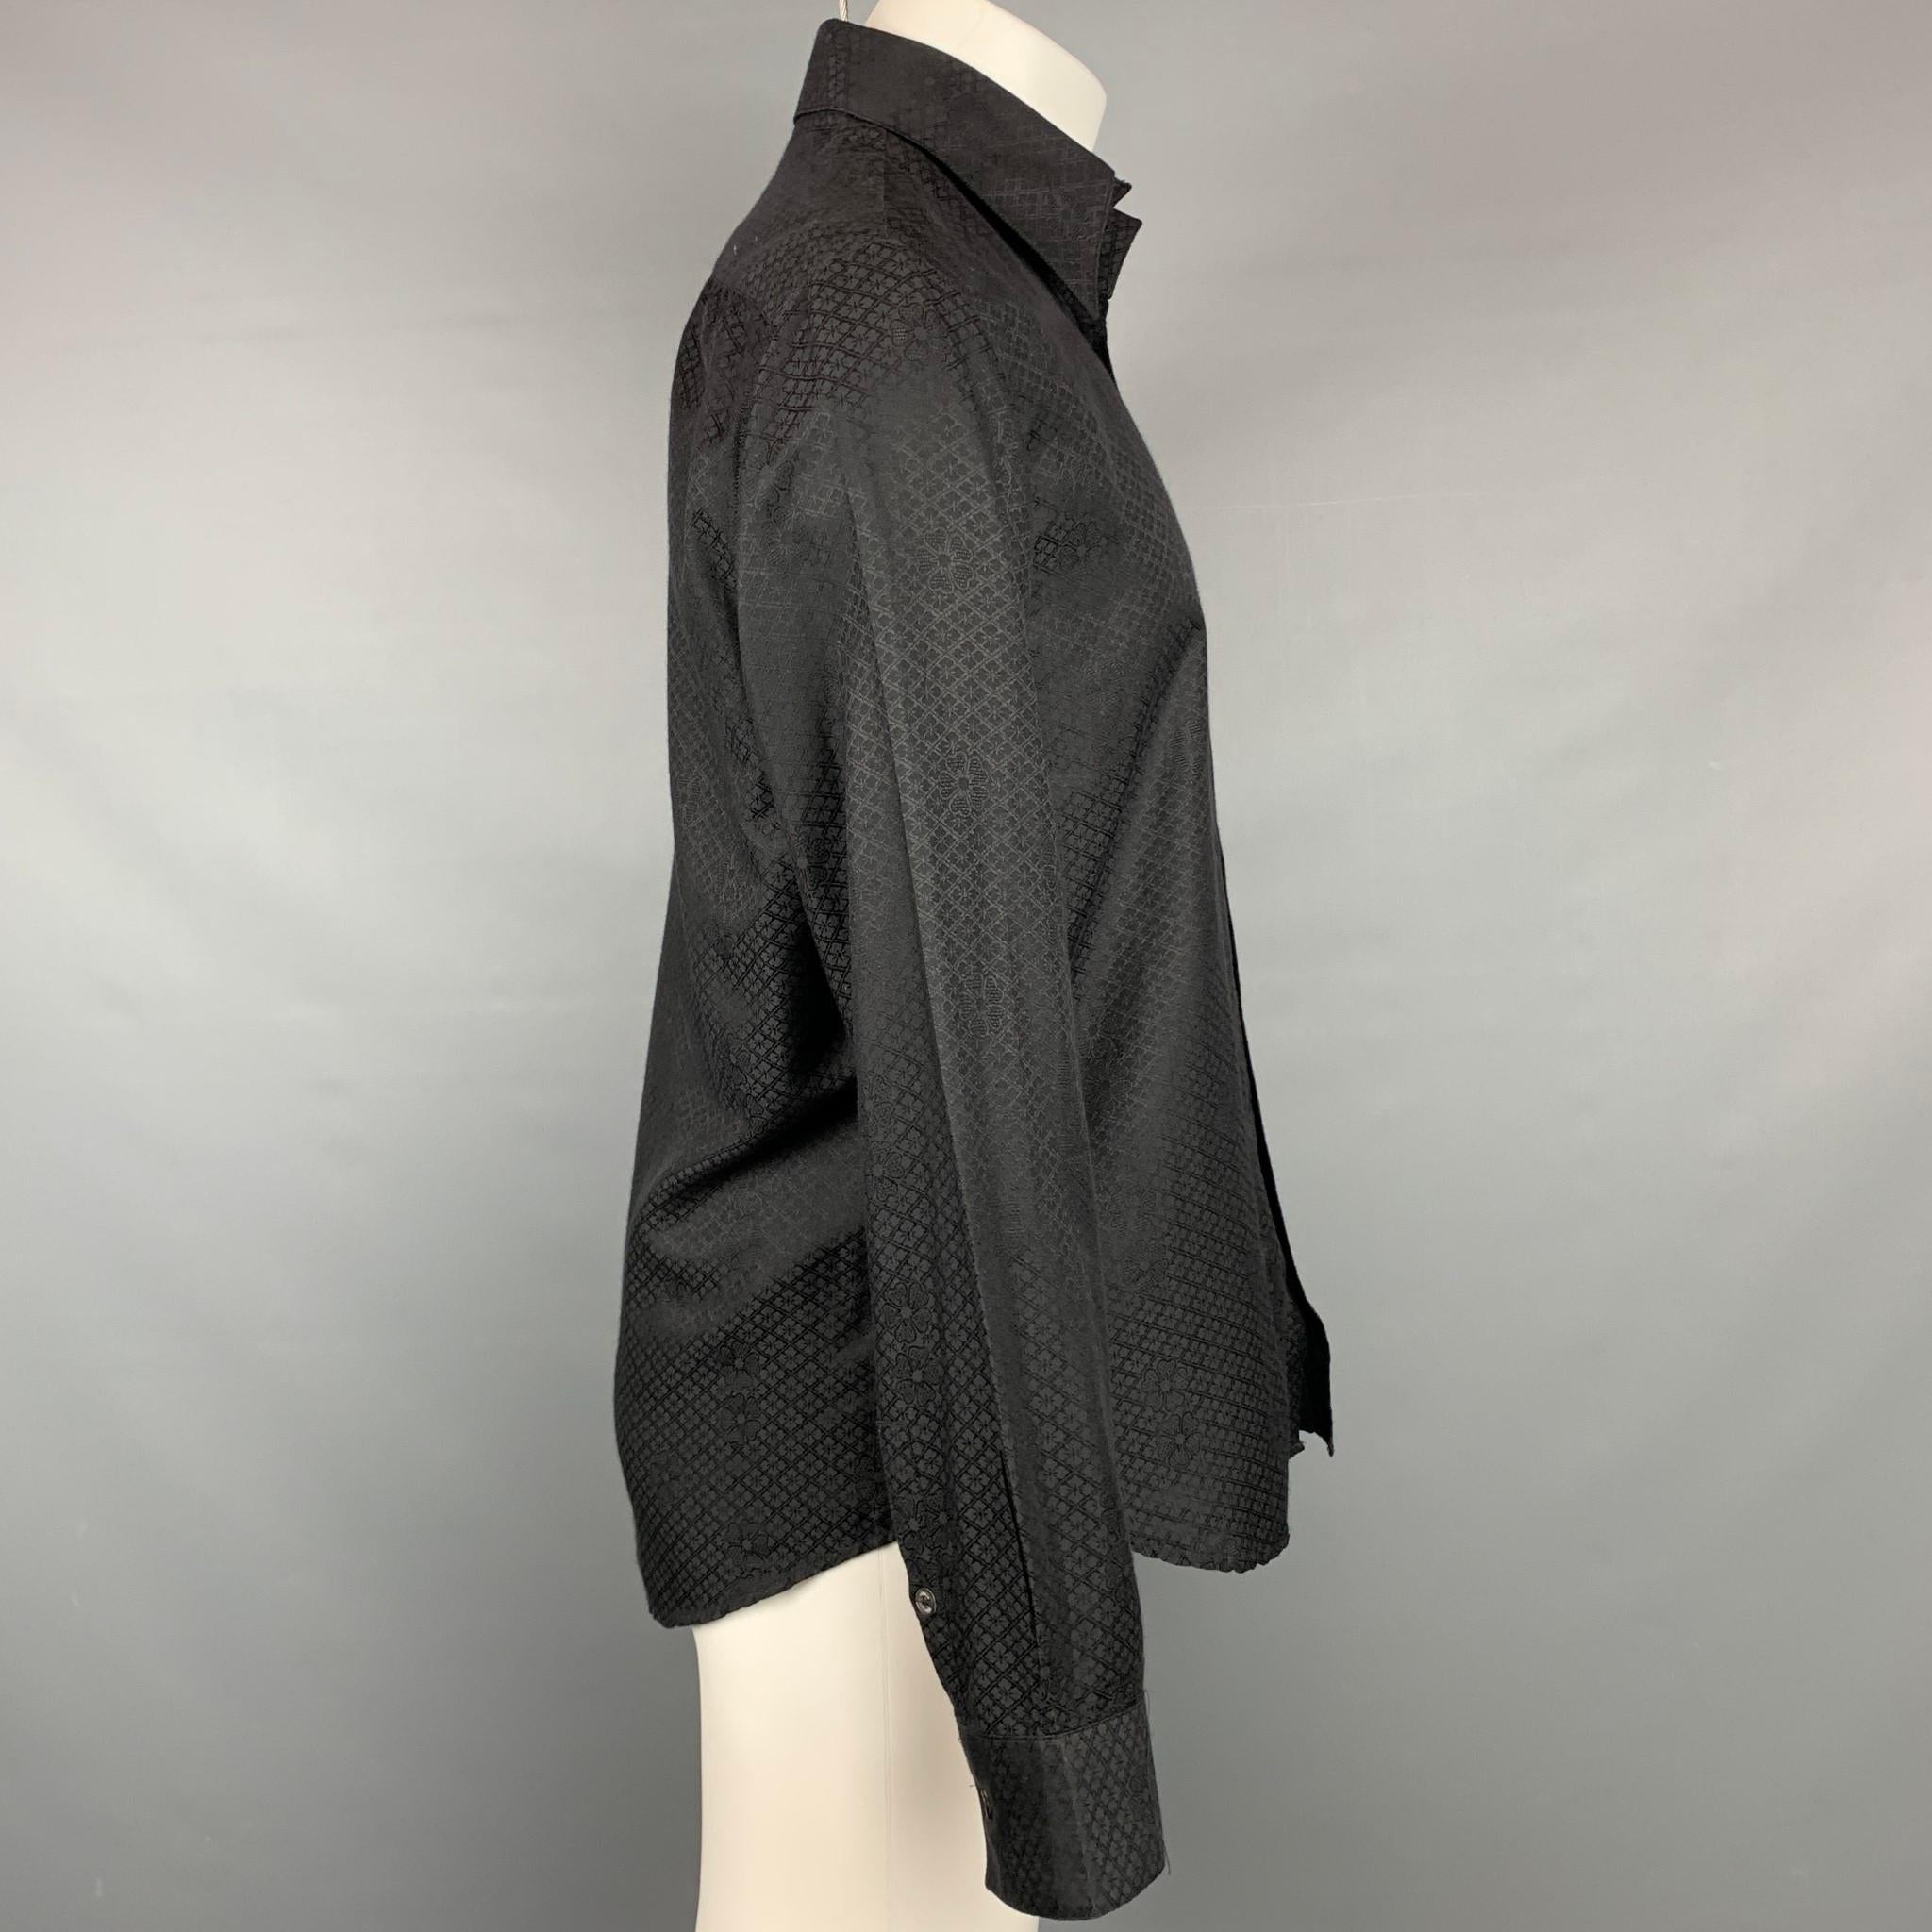 VERSUS by GIANNI VERSACE long sleeve shirt comes in a black print cotton featuring a classic style, spread collar, and a buttoned closure. Made in Italy.

Very Good Pre-Owned Condition. Minor marks at under arm.
Marked: